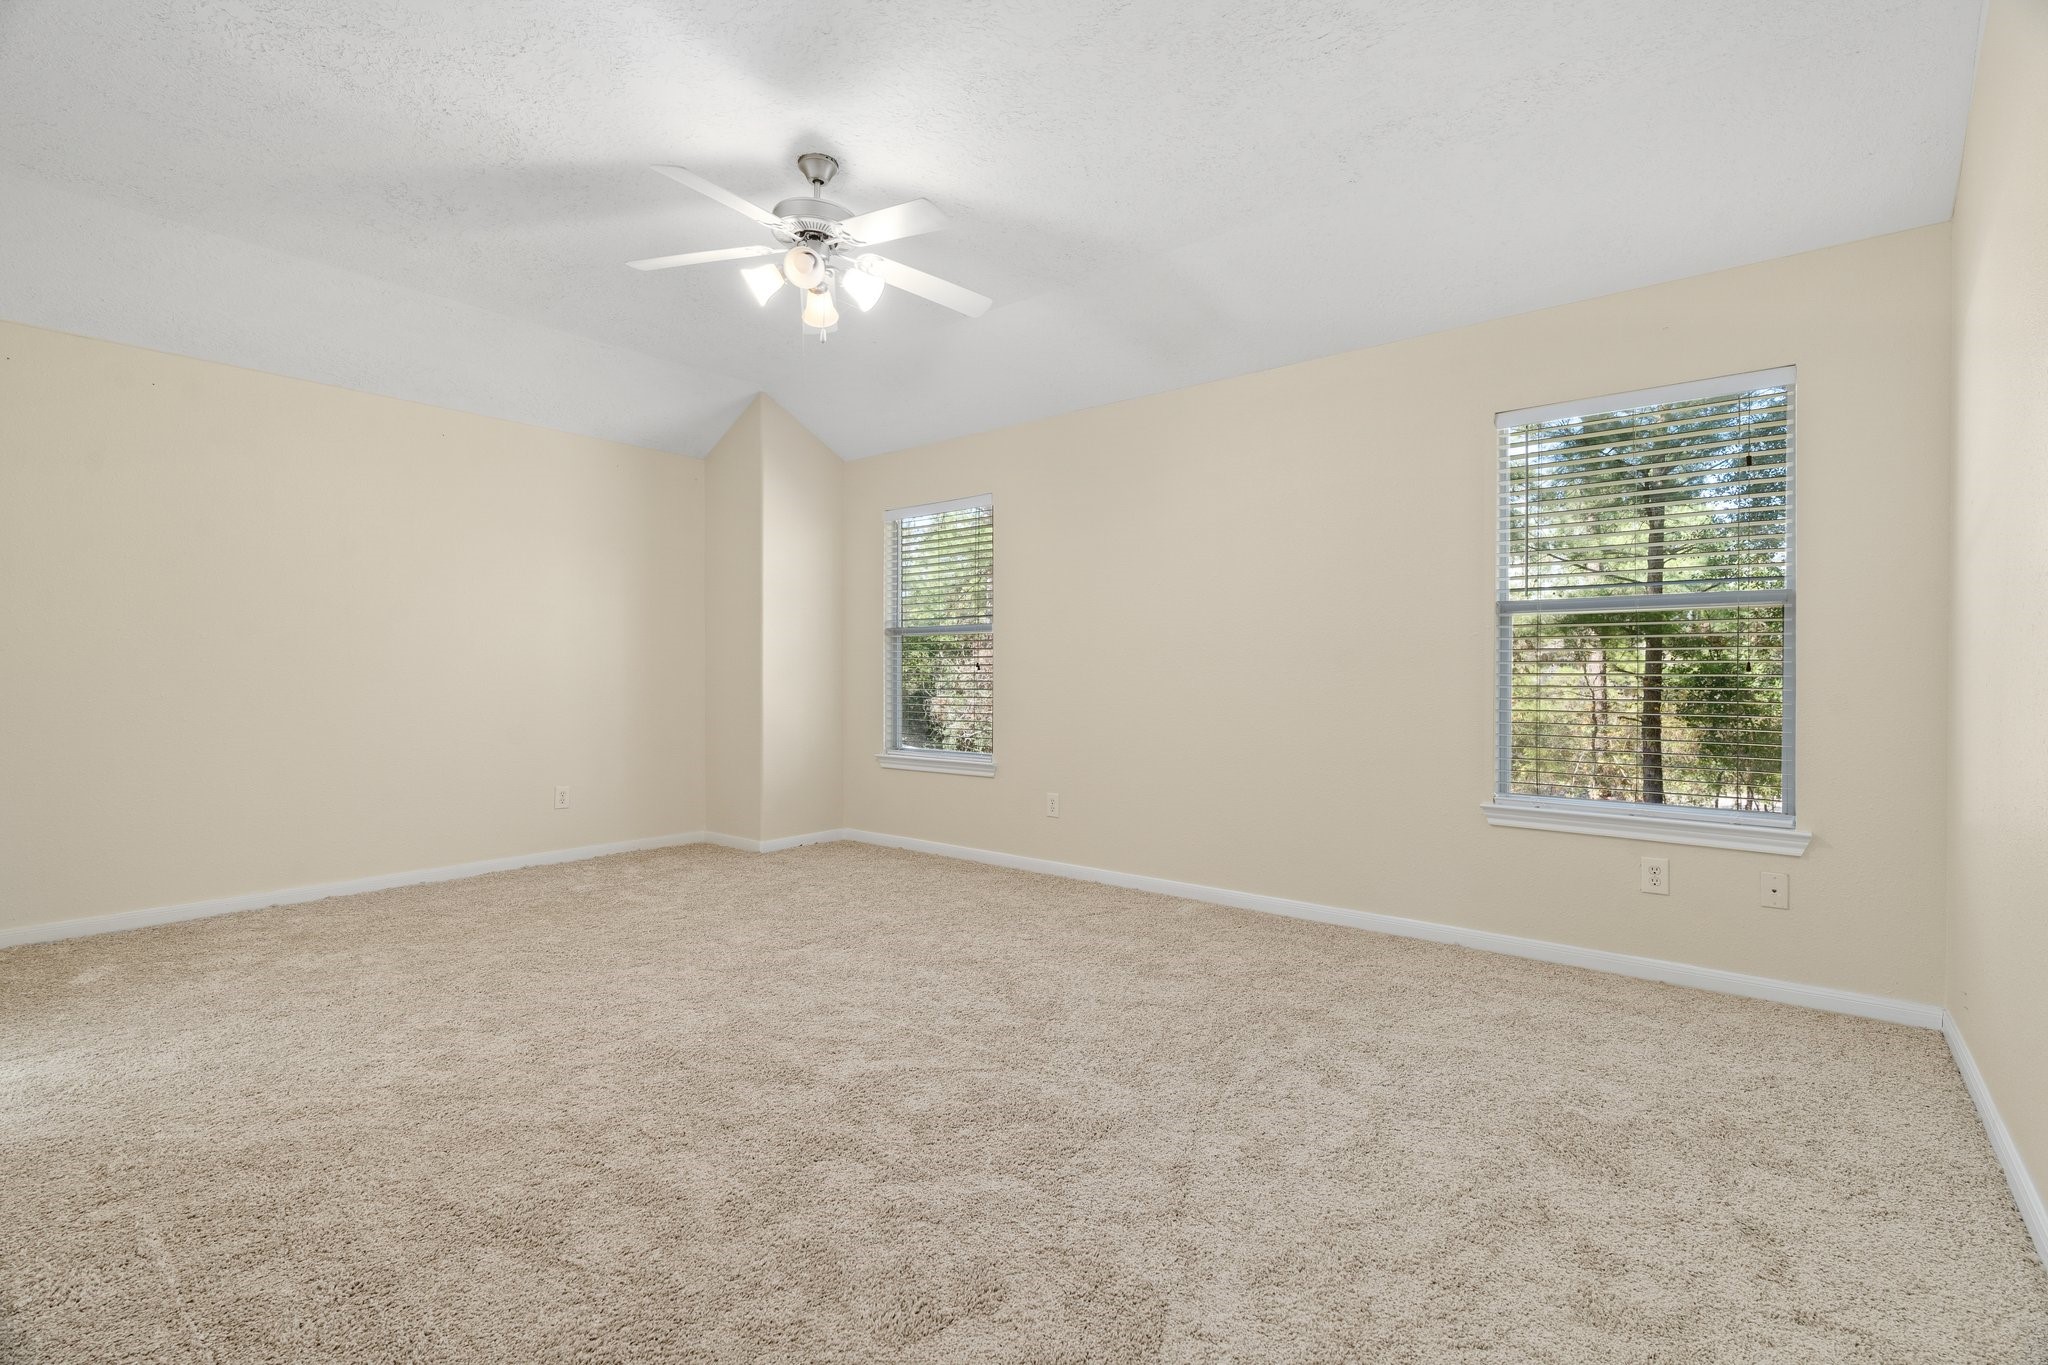 This primary bedroom is spacious and has windows overlooking the backyard.